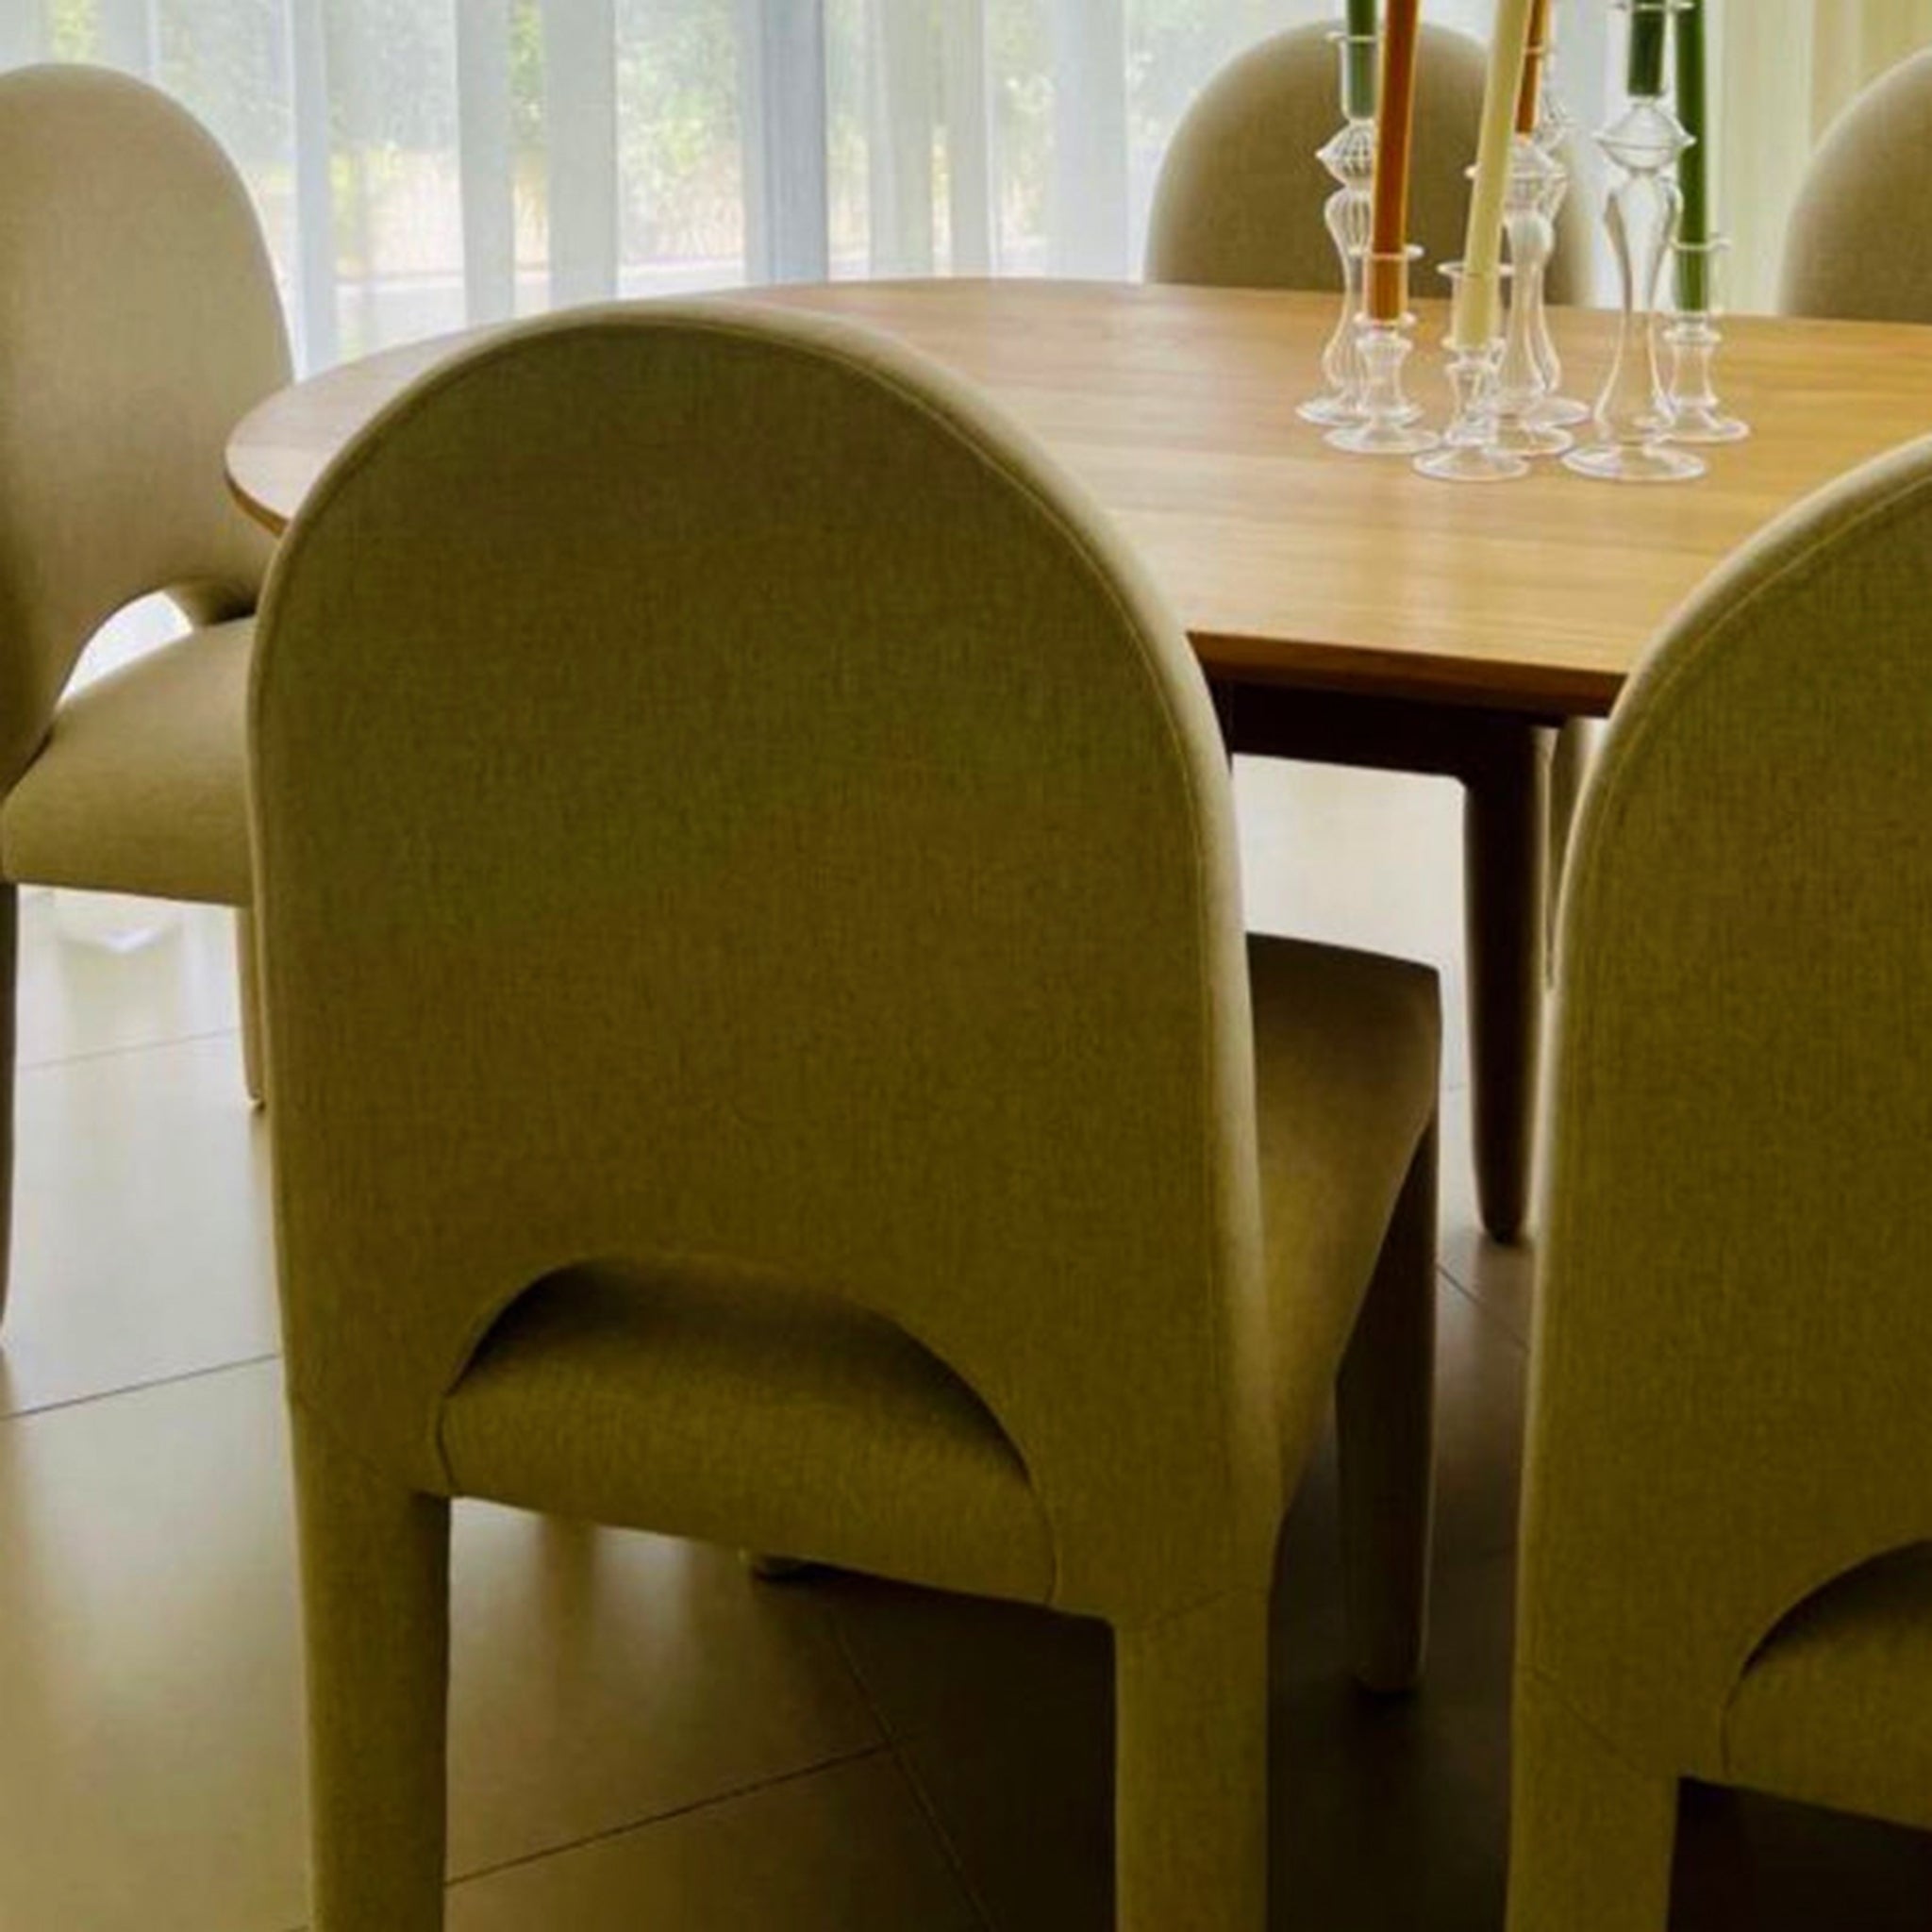 The Shelly Chair - close-up view of modern upholstered dining chairs with curved backs and elegant thin legs around a wooden dining table, decorated with glass candle holders.